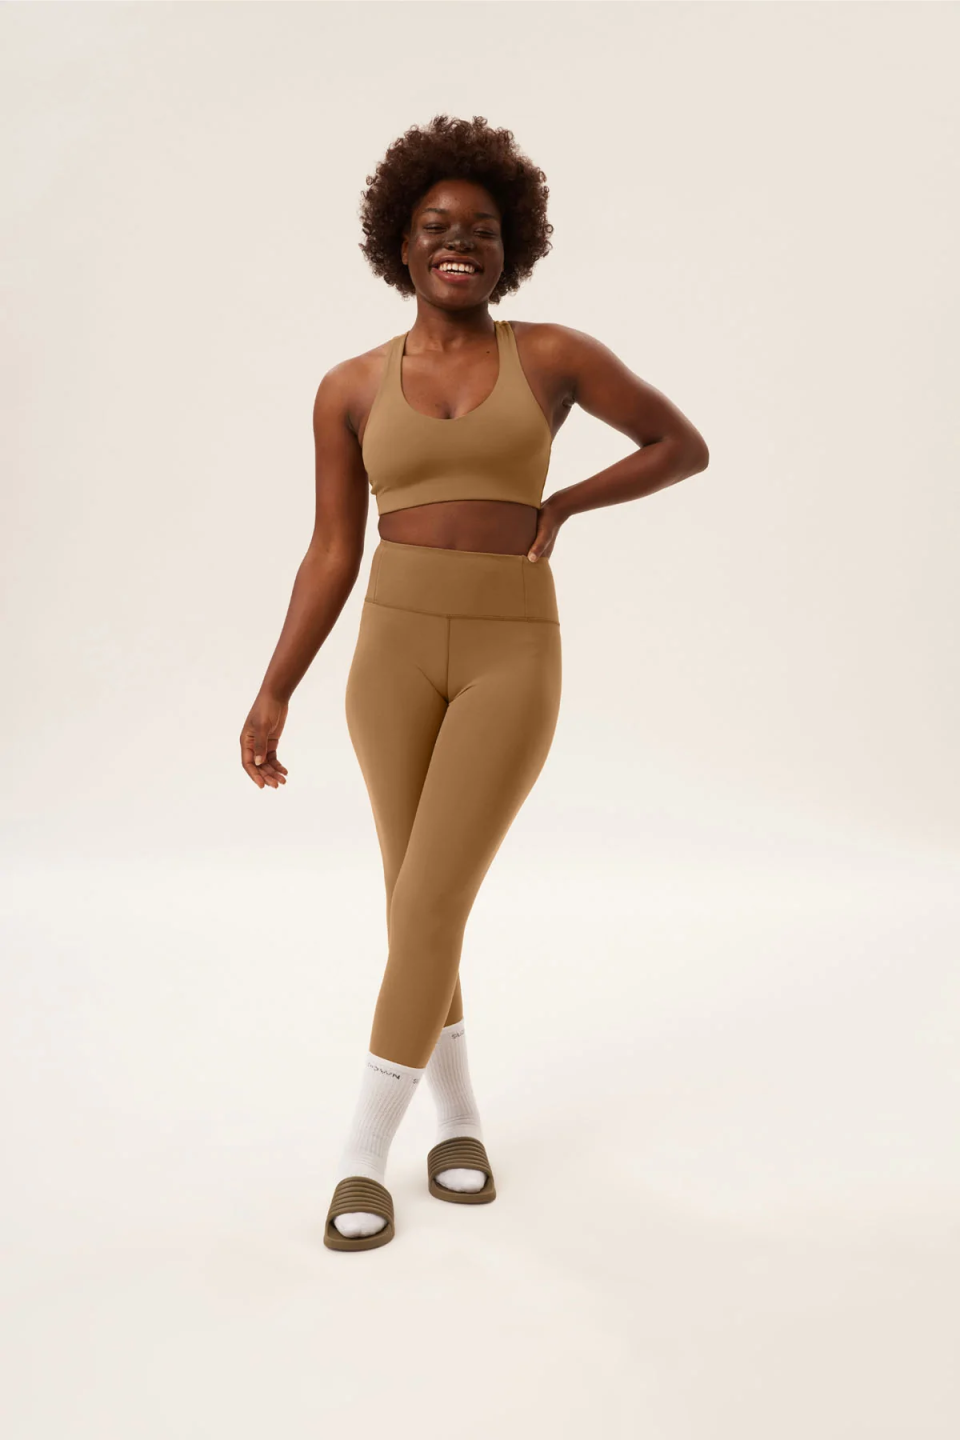 <h3>Girlfriend Collective Float Ultralight Legging</h3><br>These leggings by Girlfriend Collective are specifically designed for both lounging and being active. They're made with buttery-soft recycled material that's stretchy but also sturdy enough for physical activity.<br><br><em>Shop <strong><a href="https://girlfriend.com/products/fox-float-ultralight-legging" rel="nofollow noopener" target="_blank" data-ylk="slk:Girlfriend Collective" class="link ">Girlfriend Collective</a></strong></em><br><br><strong>Girlfriend Collective</strong> FLOAT Ultralight Legging, $, available at <a href="https://go.skimresources.com/?id=30283X879131&url=https%3A%2F%2Fgirlfriend.com%2Fproducts%2Ffox-float-ultralight-legging" rel="nofollow noopener" target="_blank" data-ylk="slk:Girlfriend Collective" class="link ">Girlfriend Collective</a>